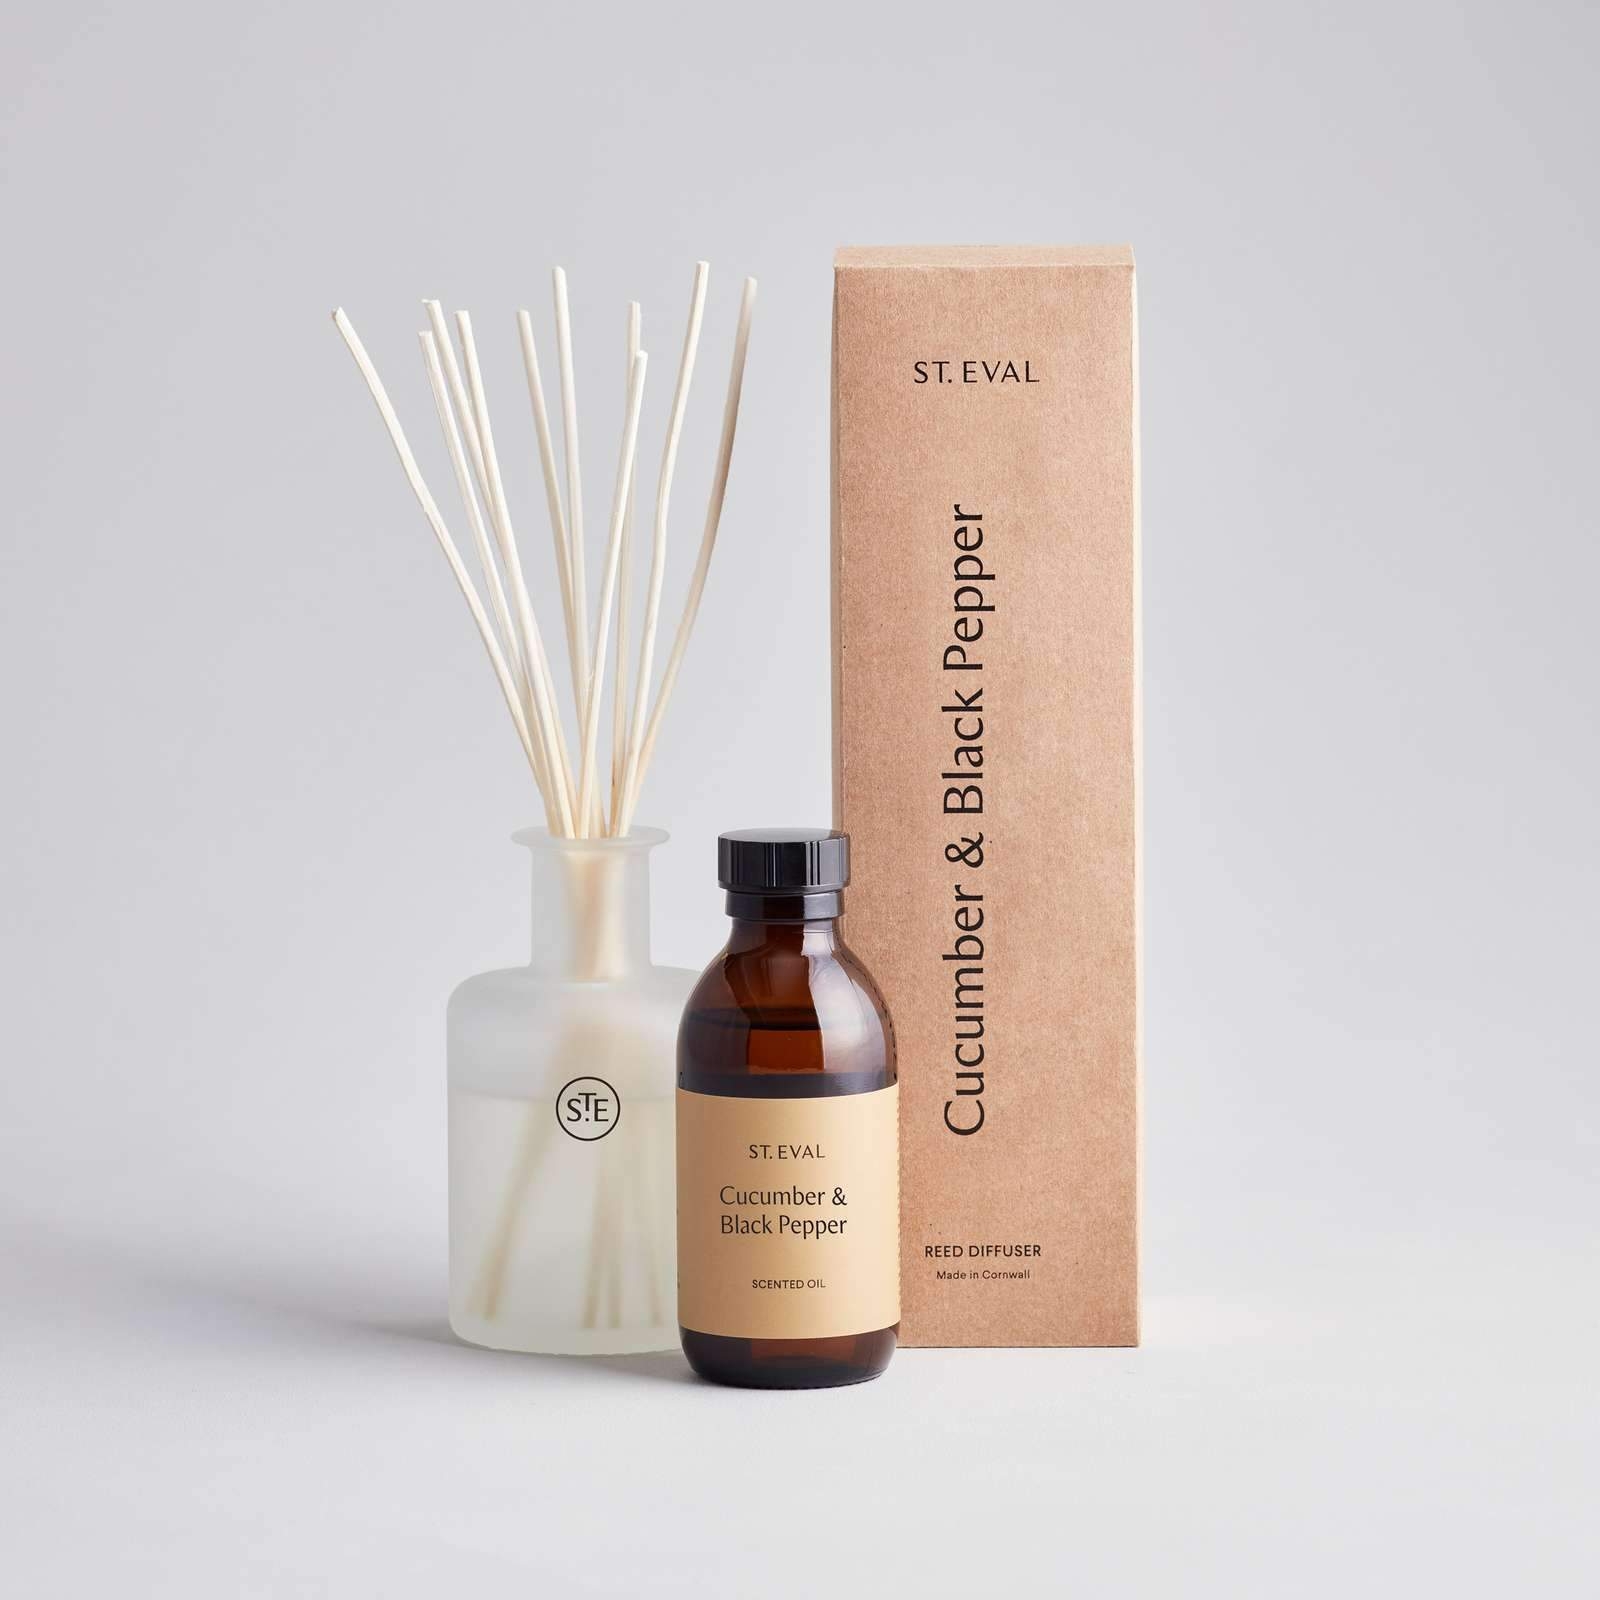 Cucumber & Black Pepper Reed Diffuser | St. Eval – St. Eval Candle Company